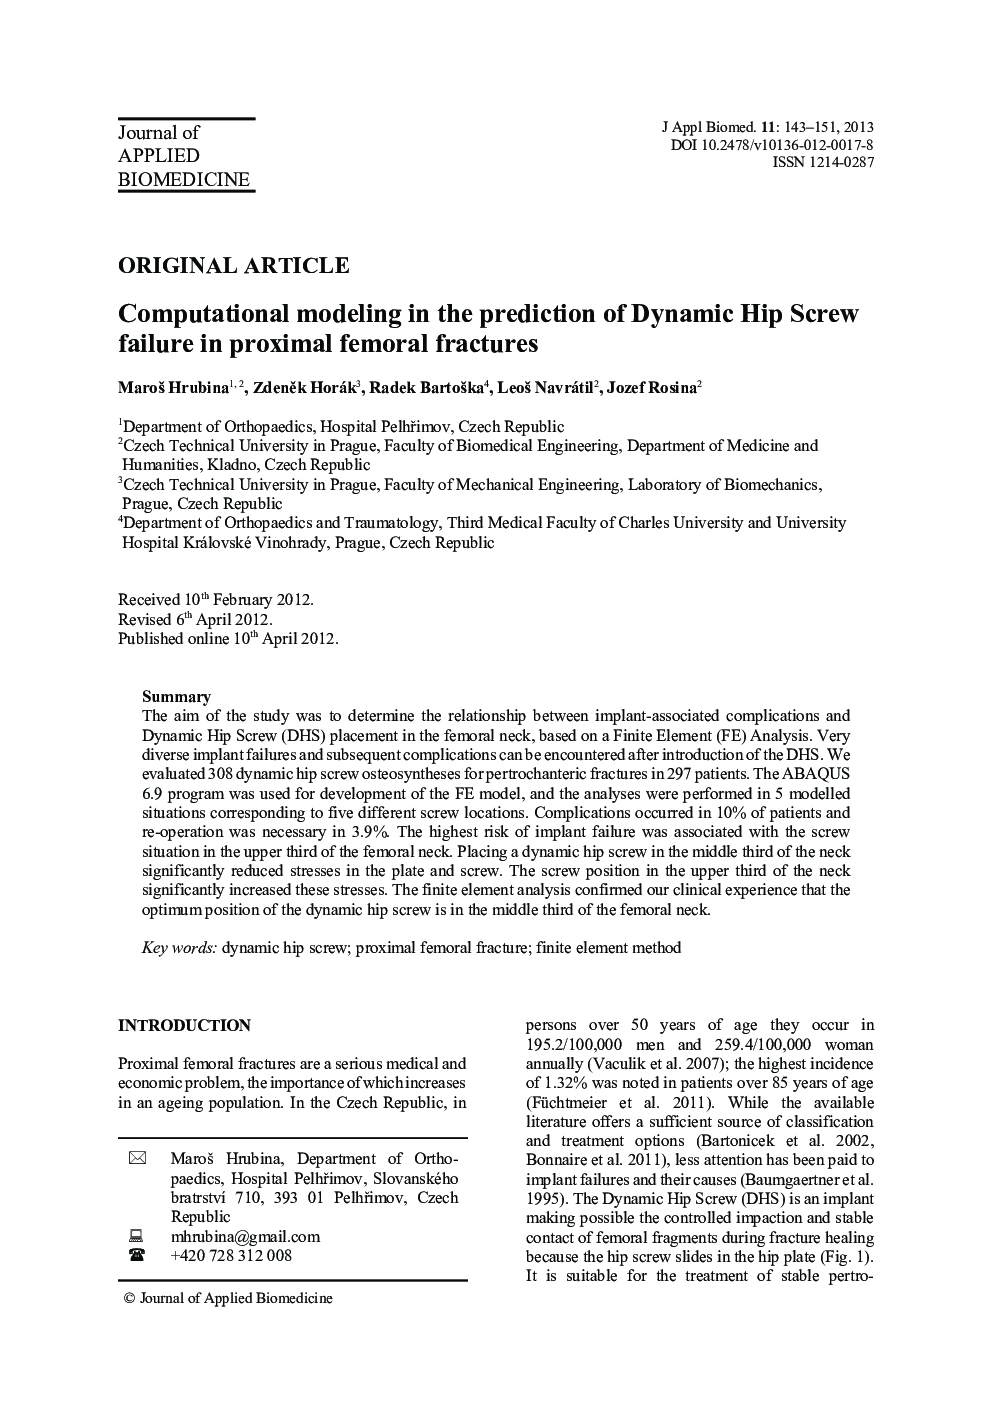 Computational modeling in the prediction of Dynamic Hip Screw failure in proximal femoral fractures 